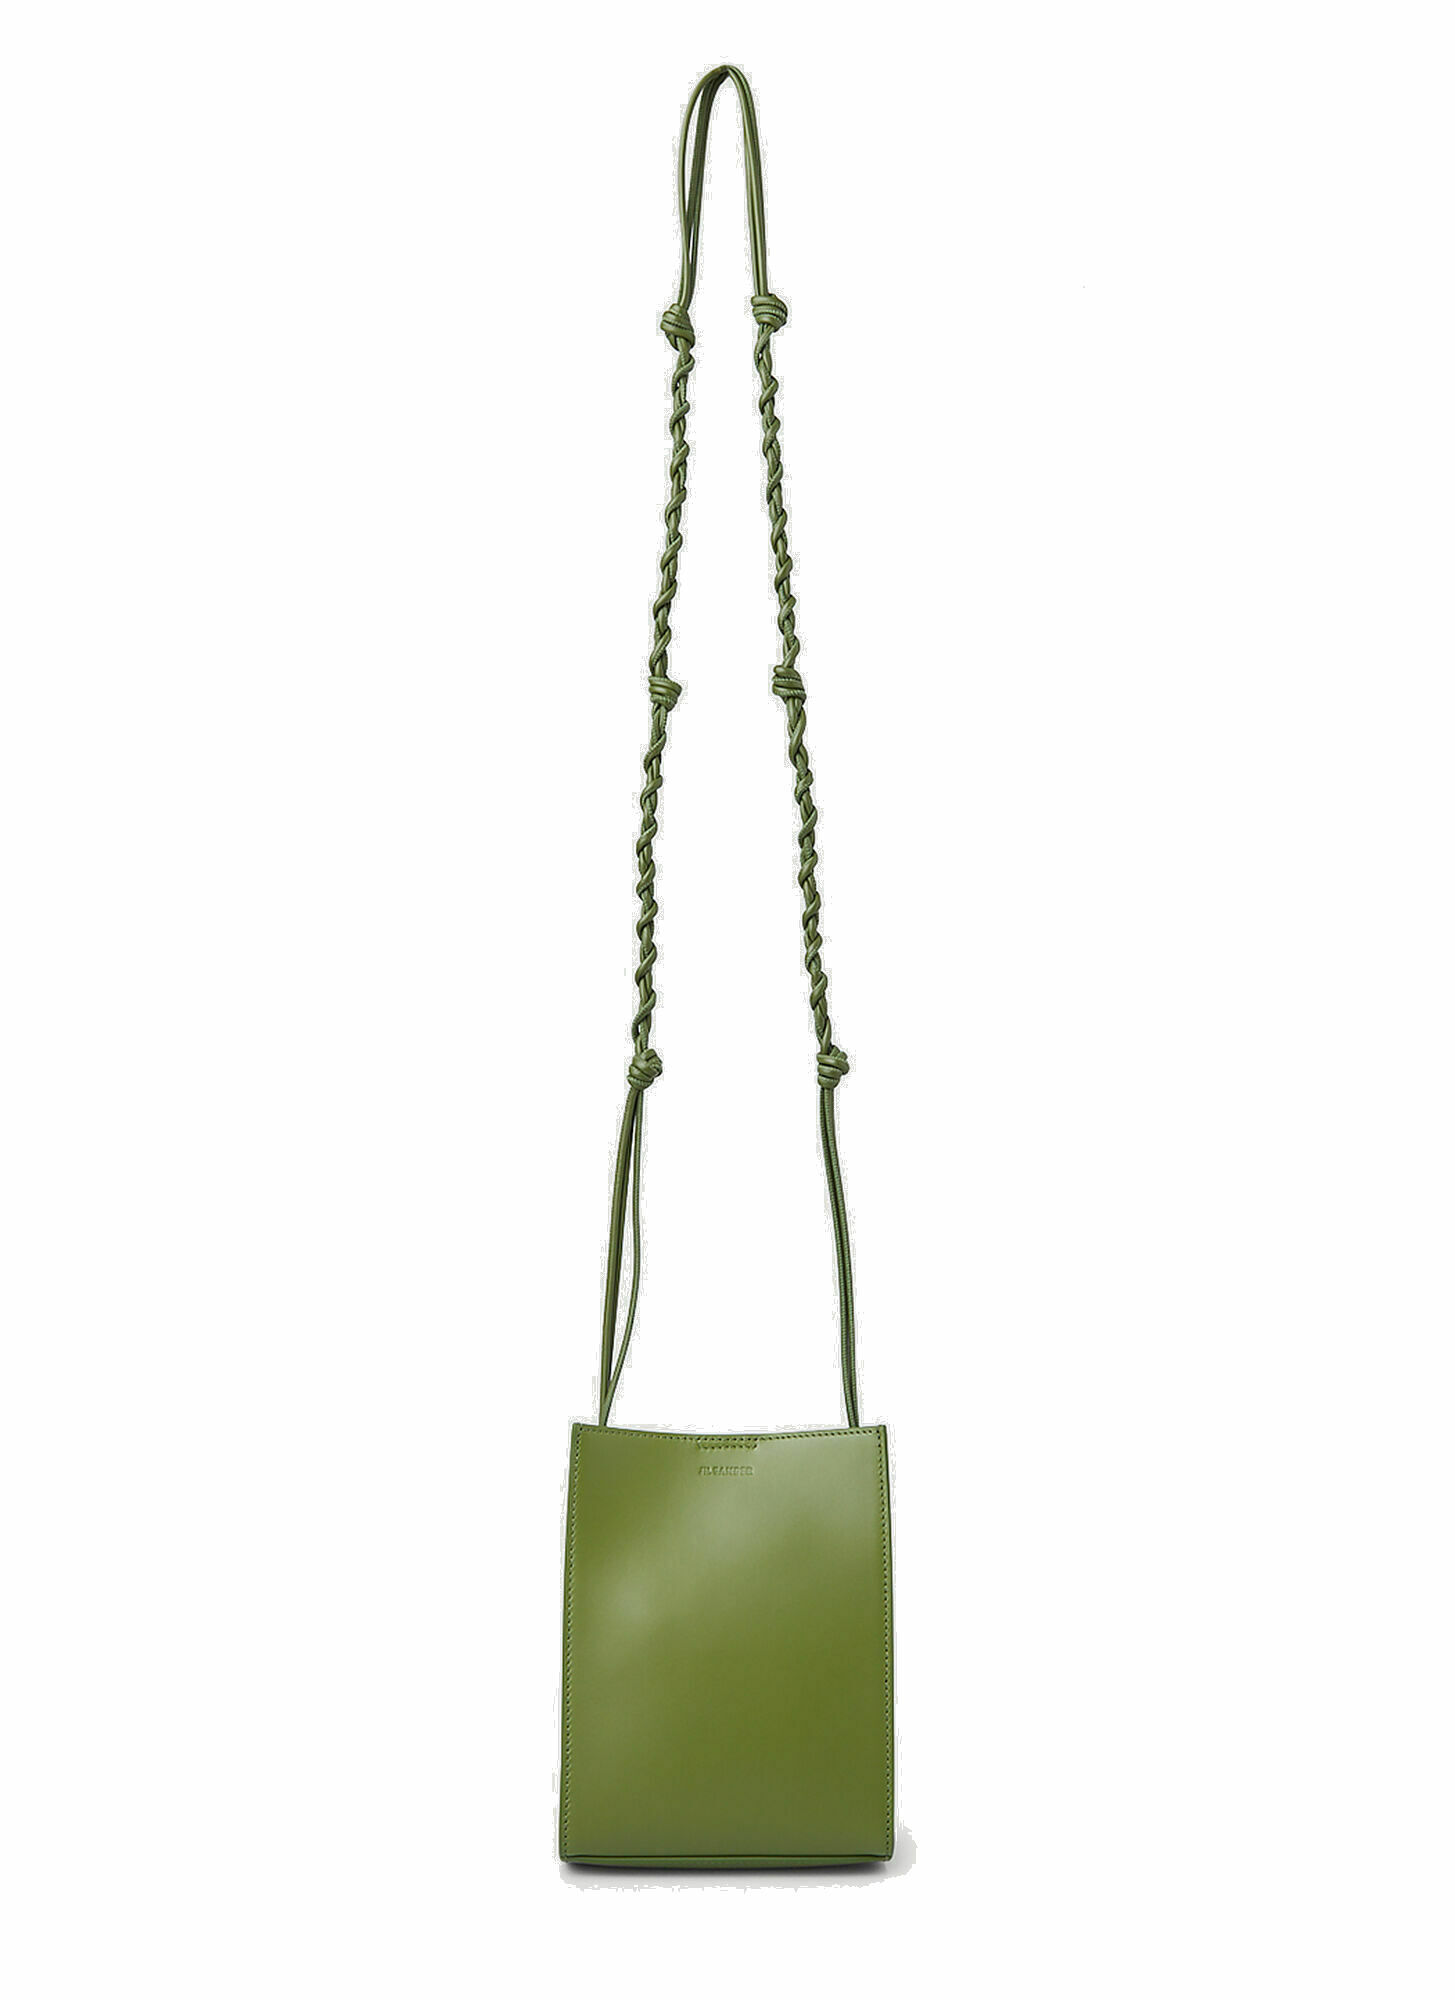 Photo: Tangle Small Shoulder Bag in Green